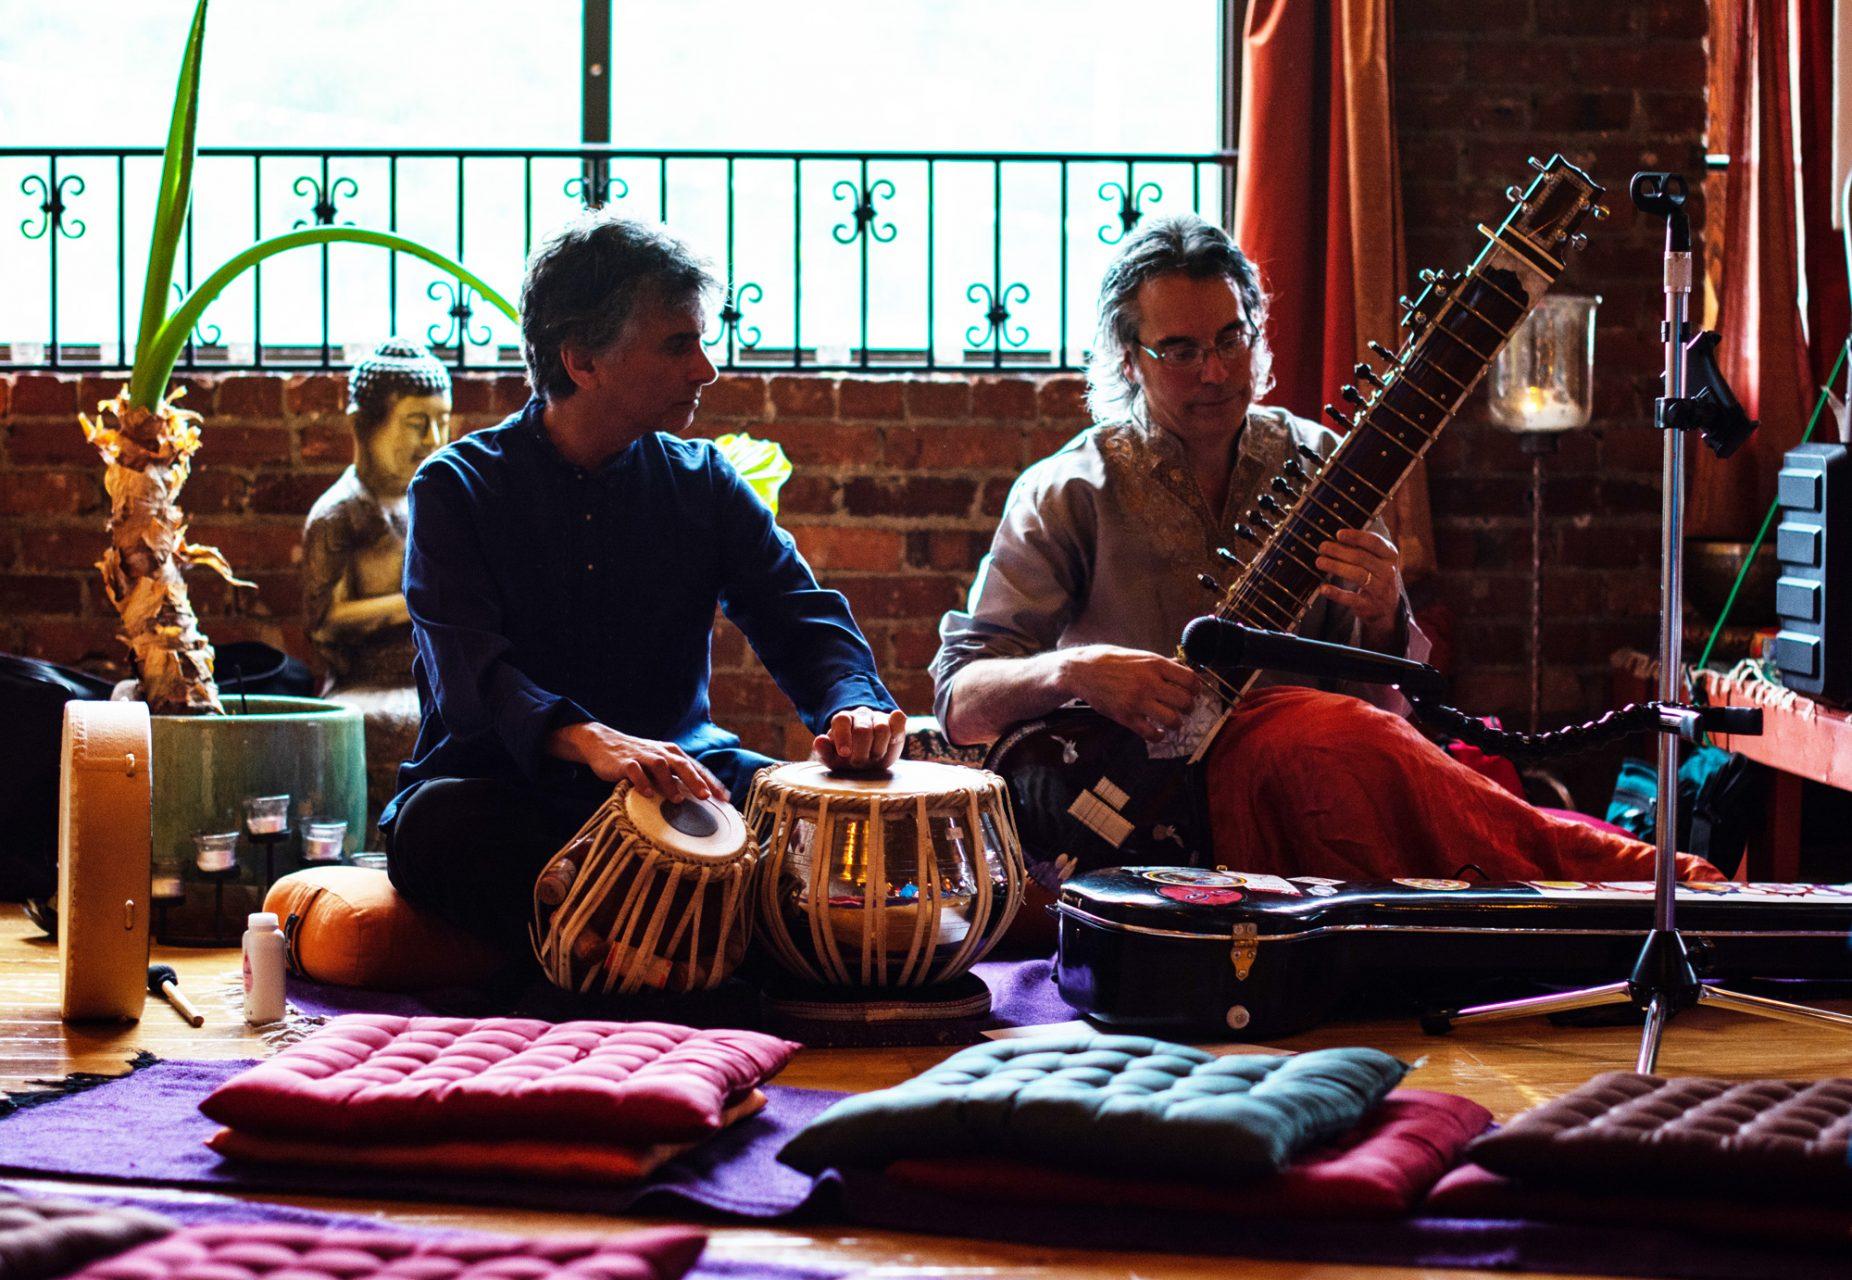 Rob Falvo (left) and Todd Bush (right) rehearse with their instruments prior to the evenings performance. They played a melody called Raga Saraswati in dedication to the goddess of art, music, and knowledge.